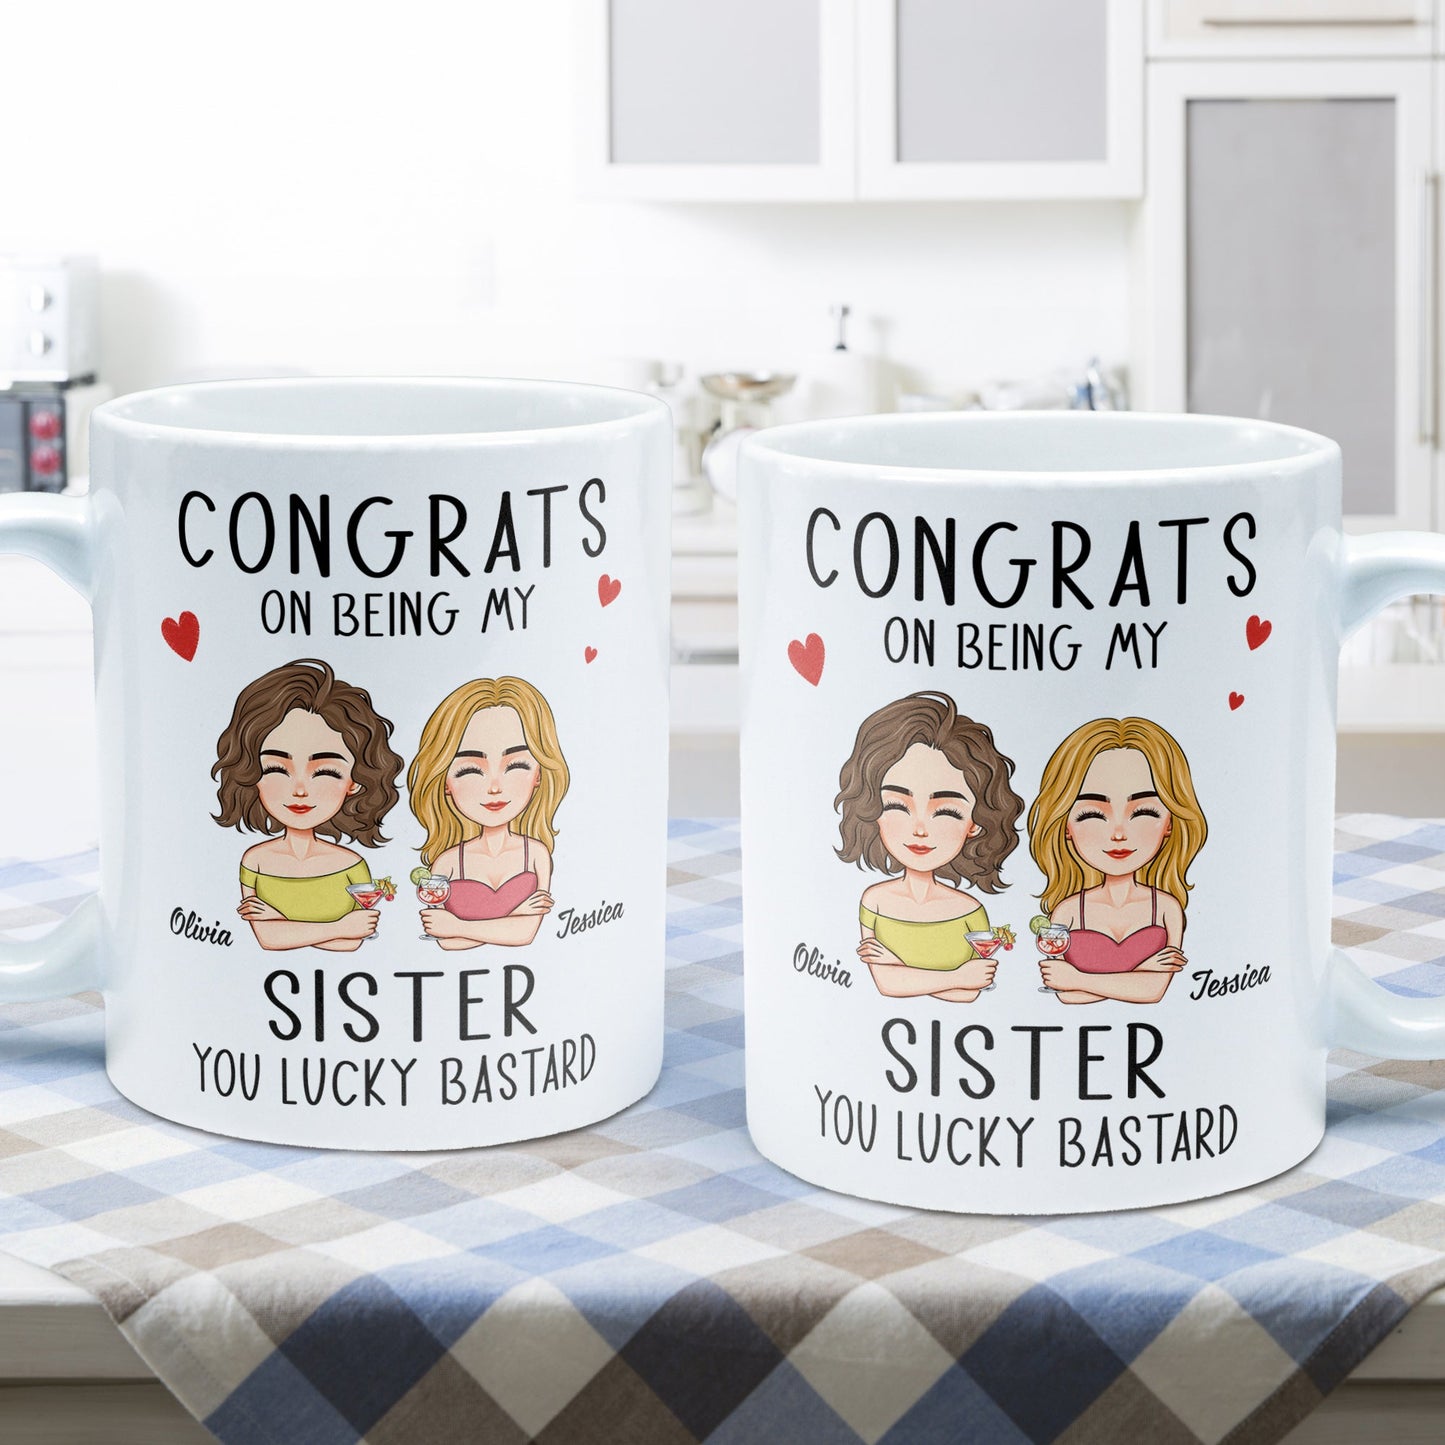 Congrats On Being My Sister - Personalized Mug